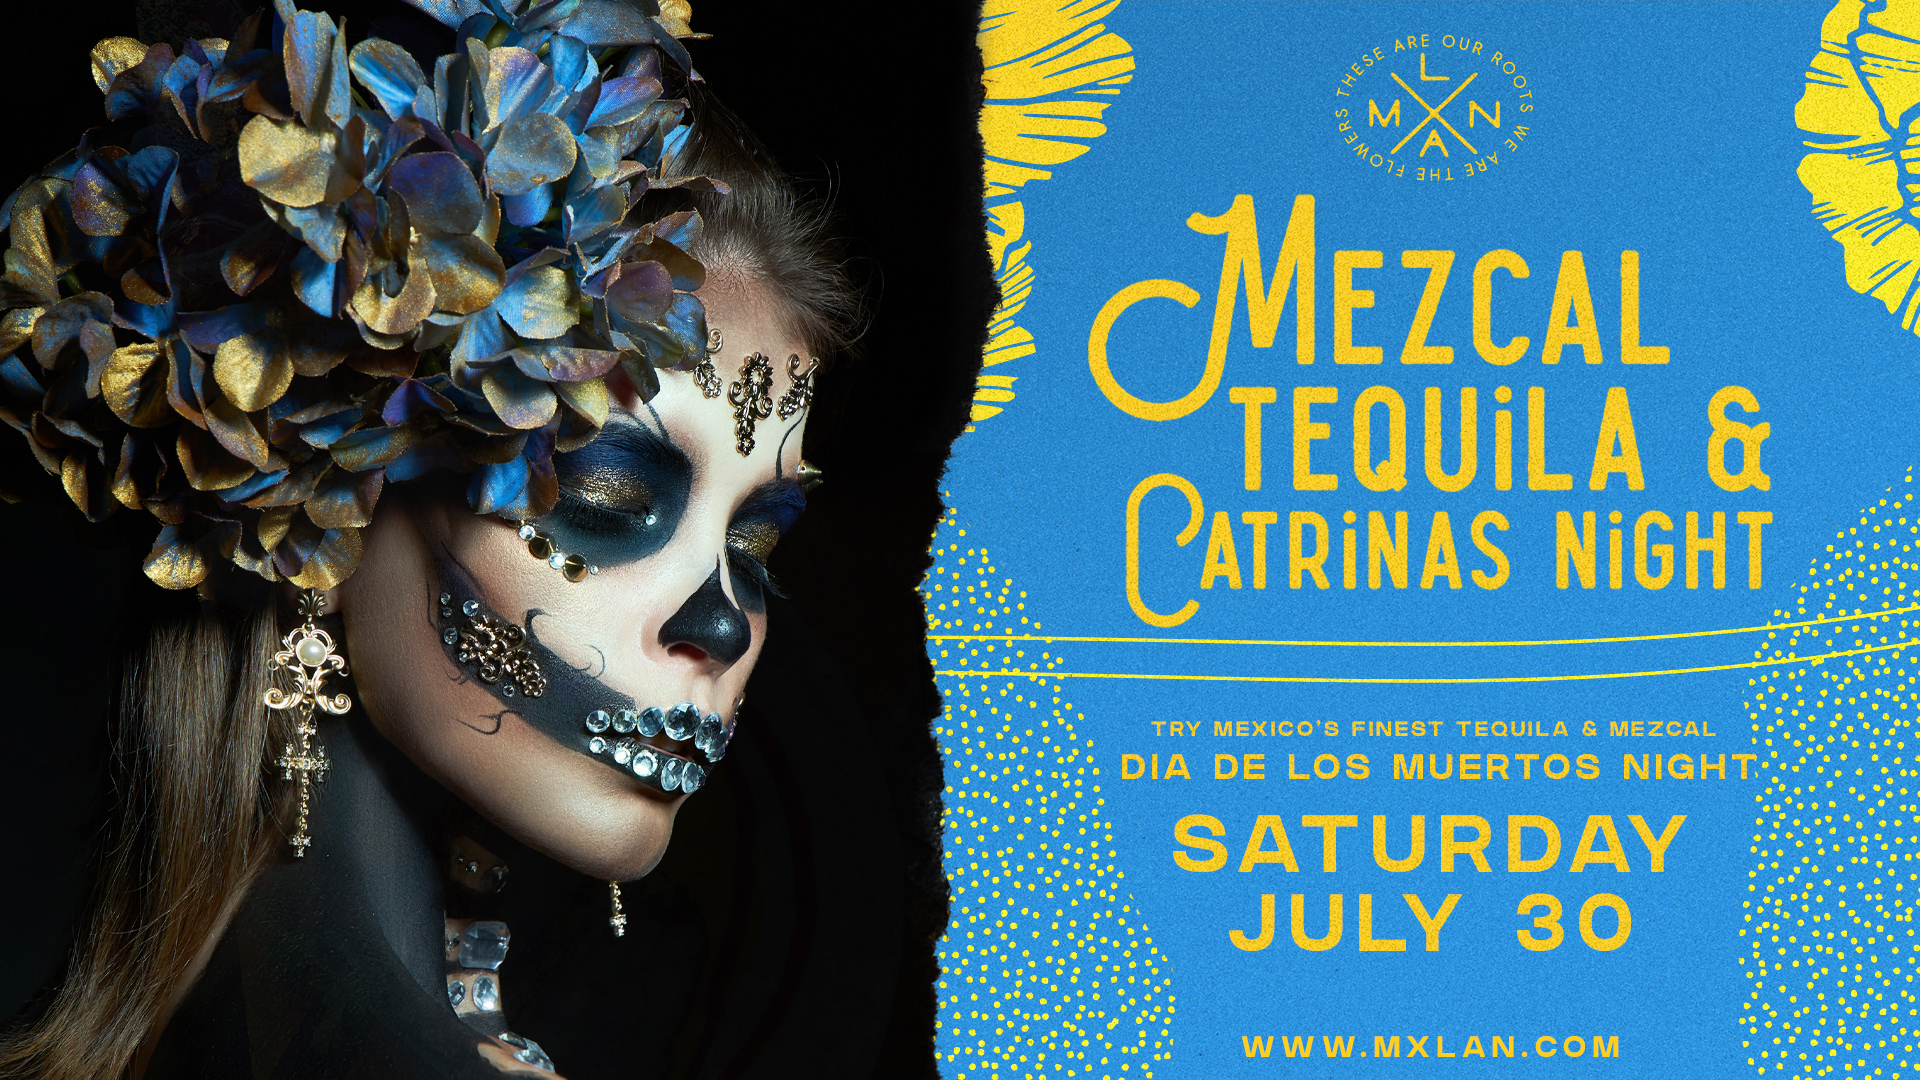 mxlan mezcal, tequila catrina festival mcallen latino latinx music arts best fesitval in texas acl south by south west coachella rio grande valley south padre island brownsville indie best latino festival in us breakthrough stage